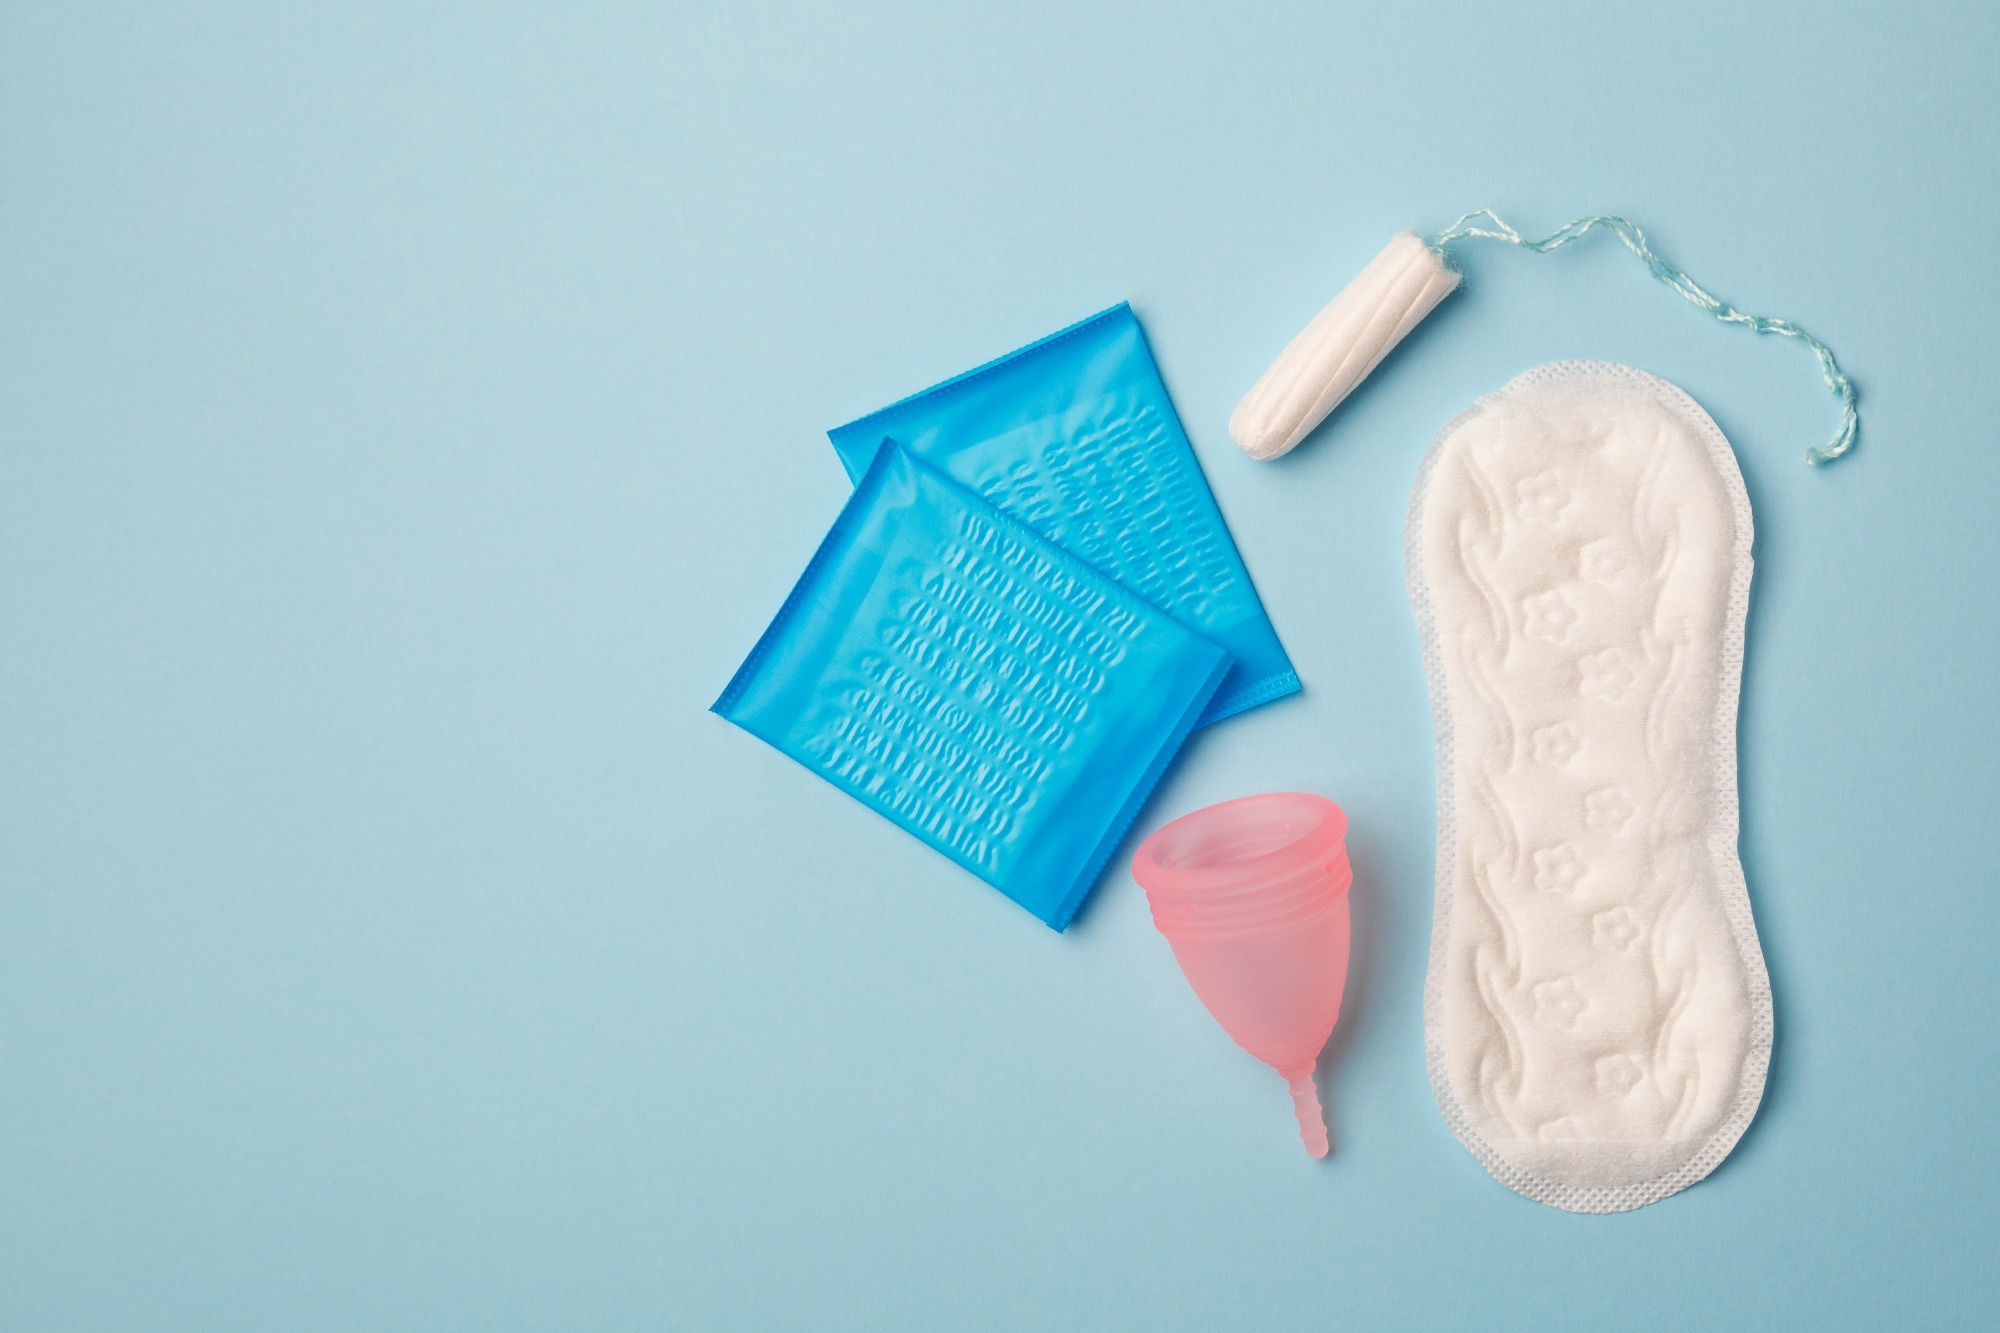 Study assesses capacity of modern menstrual products to better diagnose  heavy menstrual bleeding